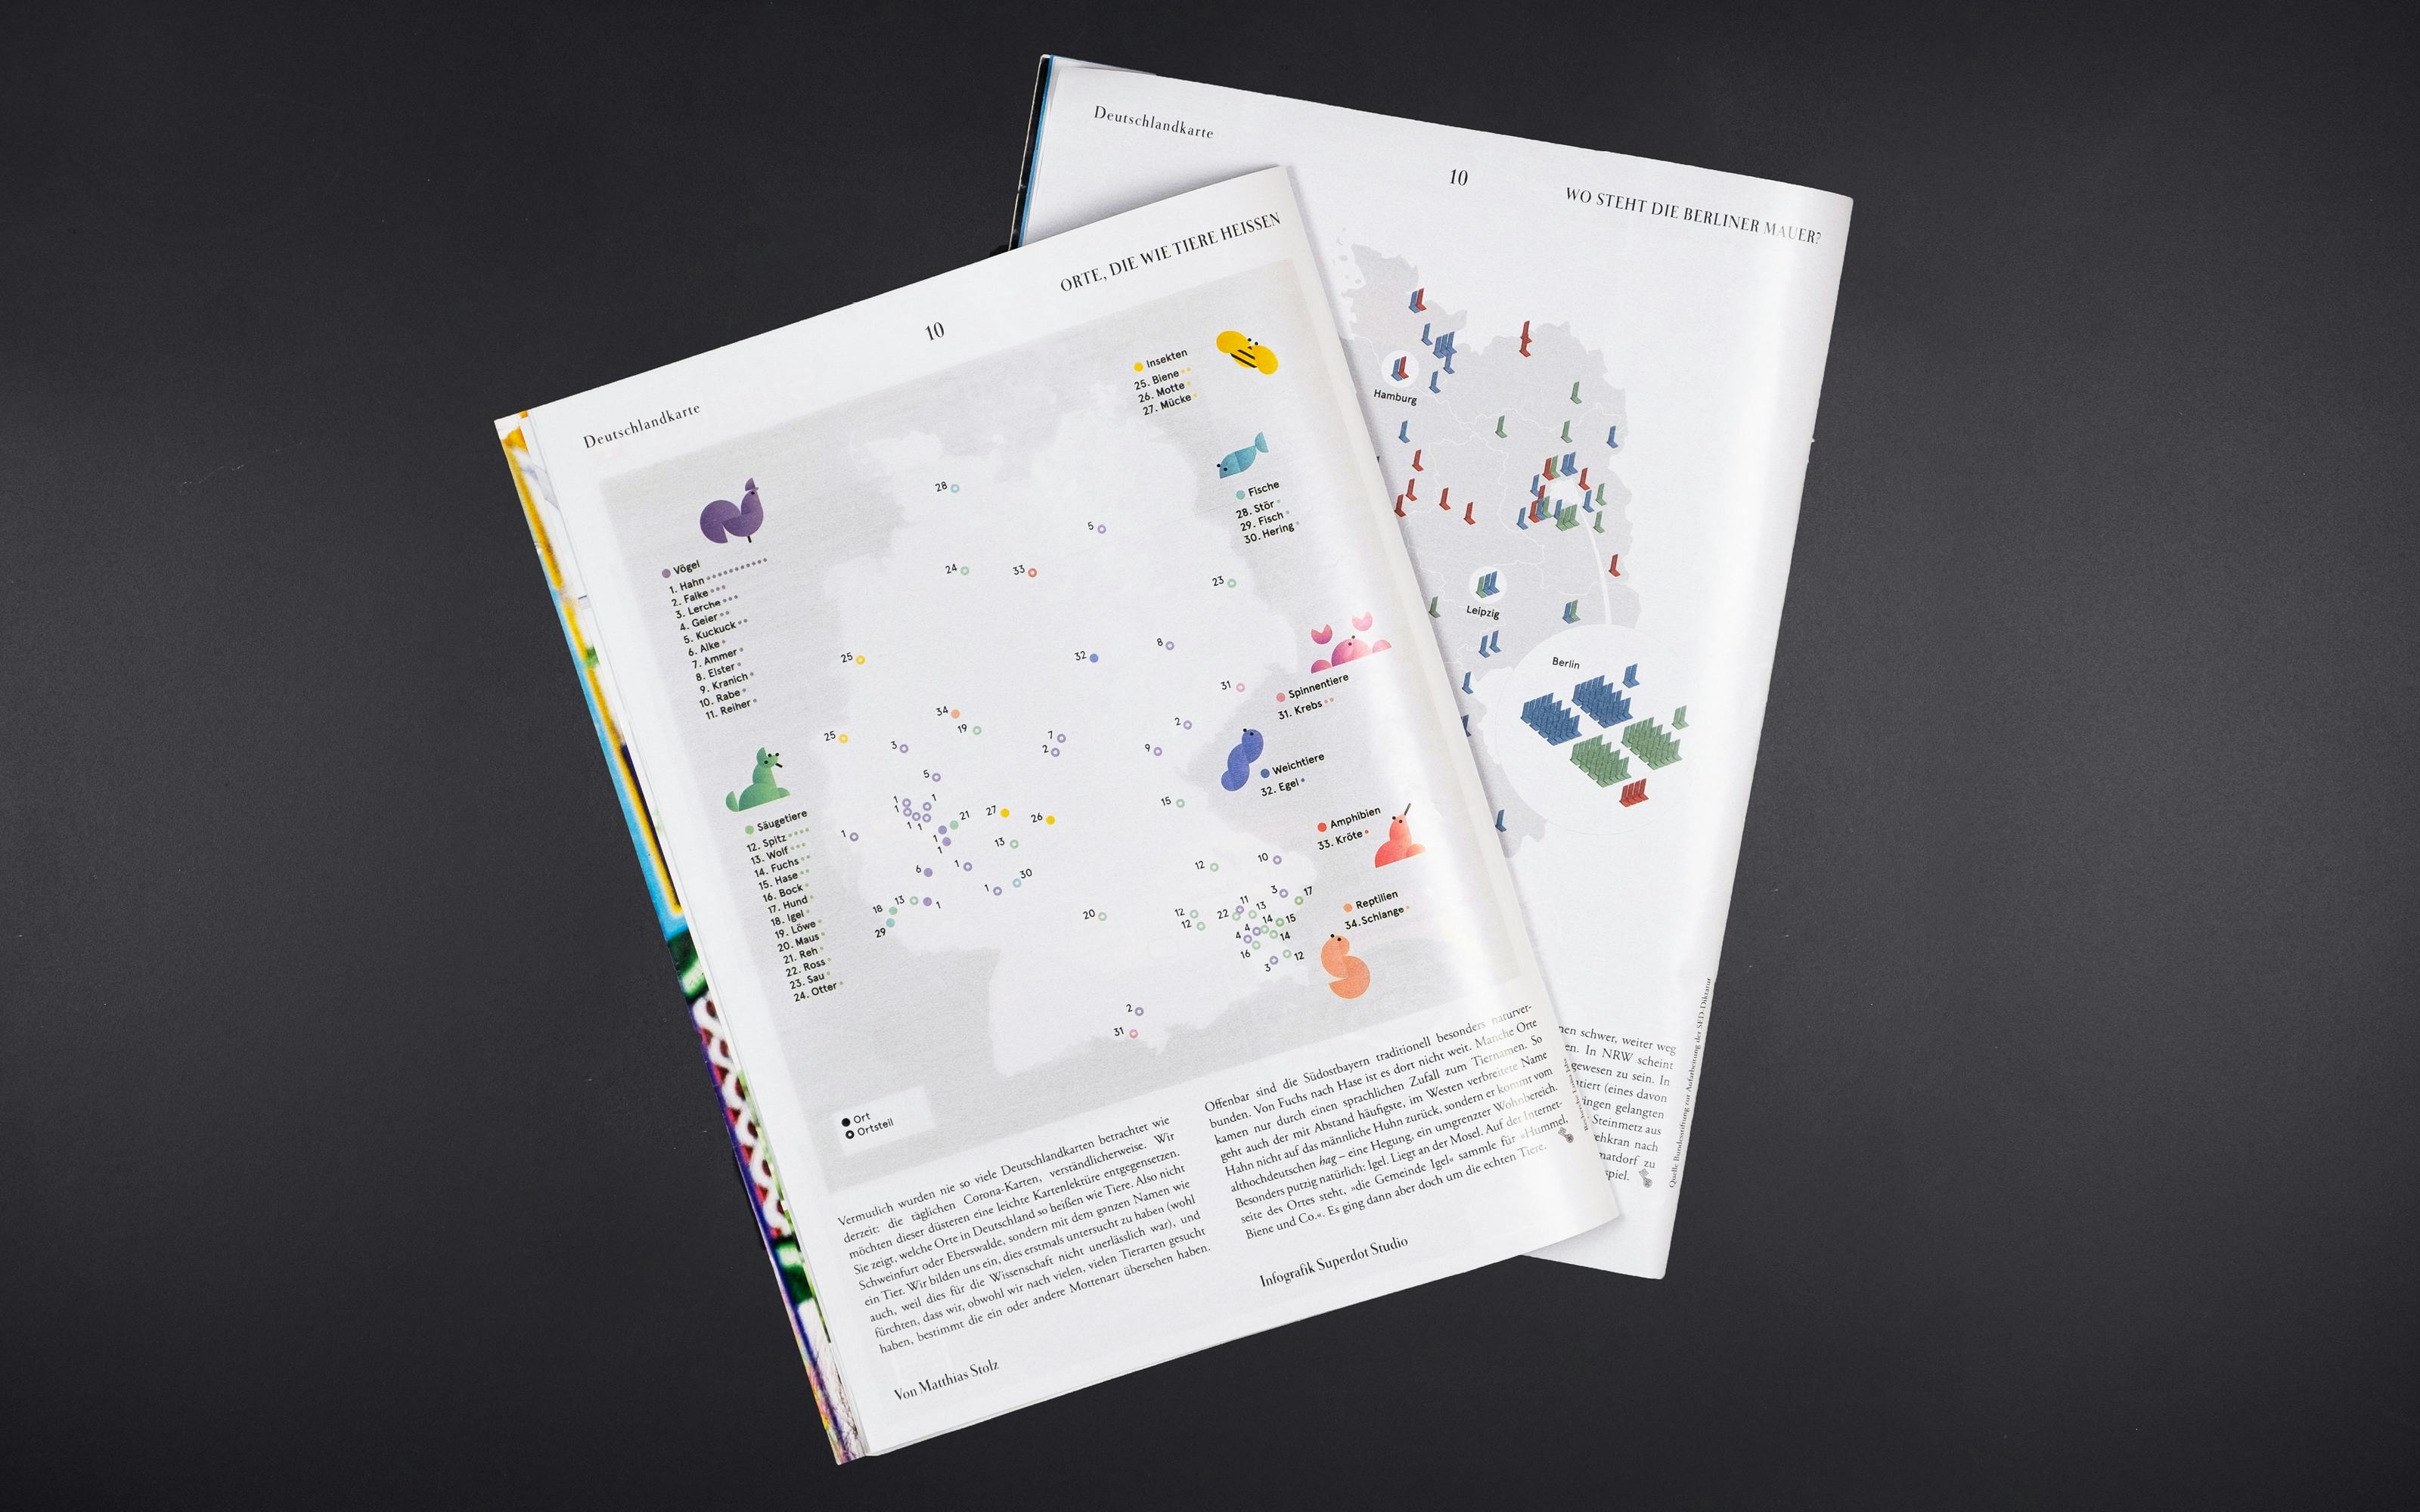 Superdot created the "Deutschlandkarte" (Map of Germany) for some issues of the weekly ZEITMagazin. These thematically different maps show facts about Germany. The focus in this project is on continuing the previous branding brief from Die Zeit, working with journalists and developing a modular easy-to-understand visual language.